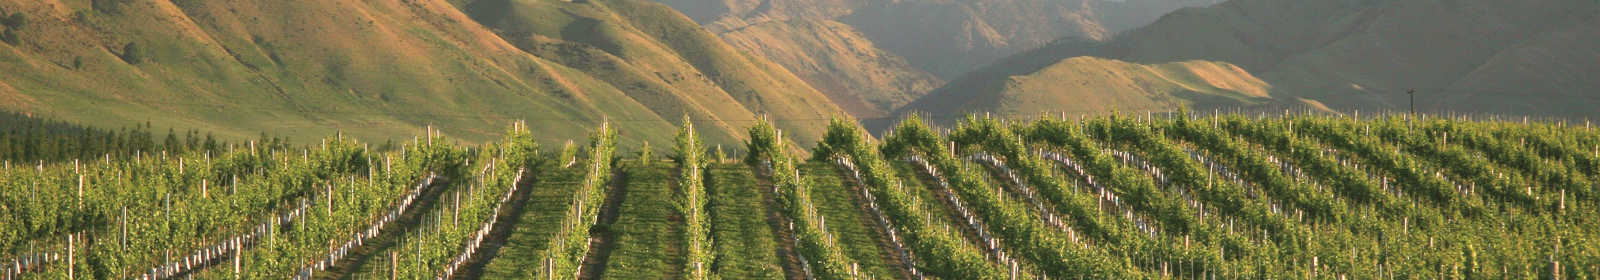 Vineyard with mountains